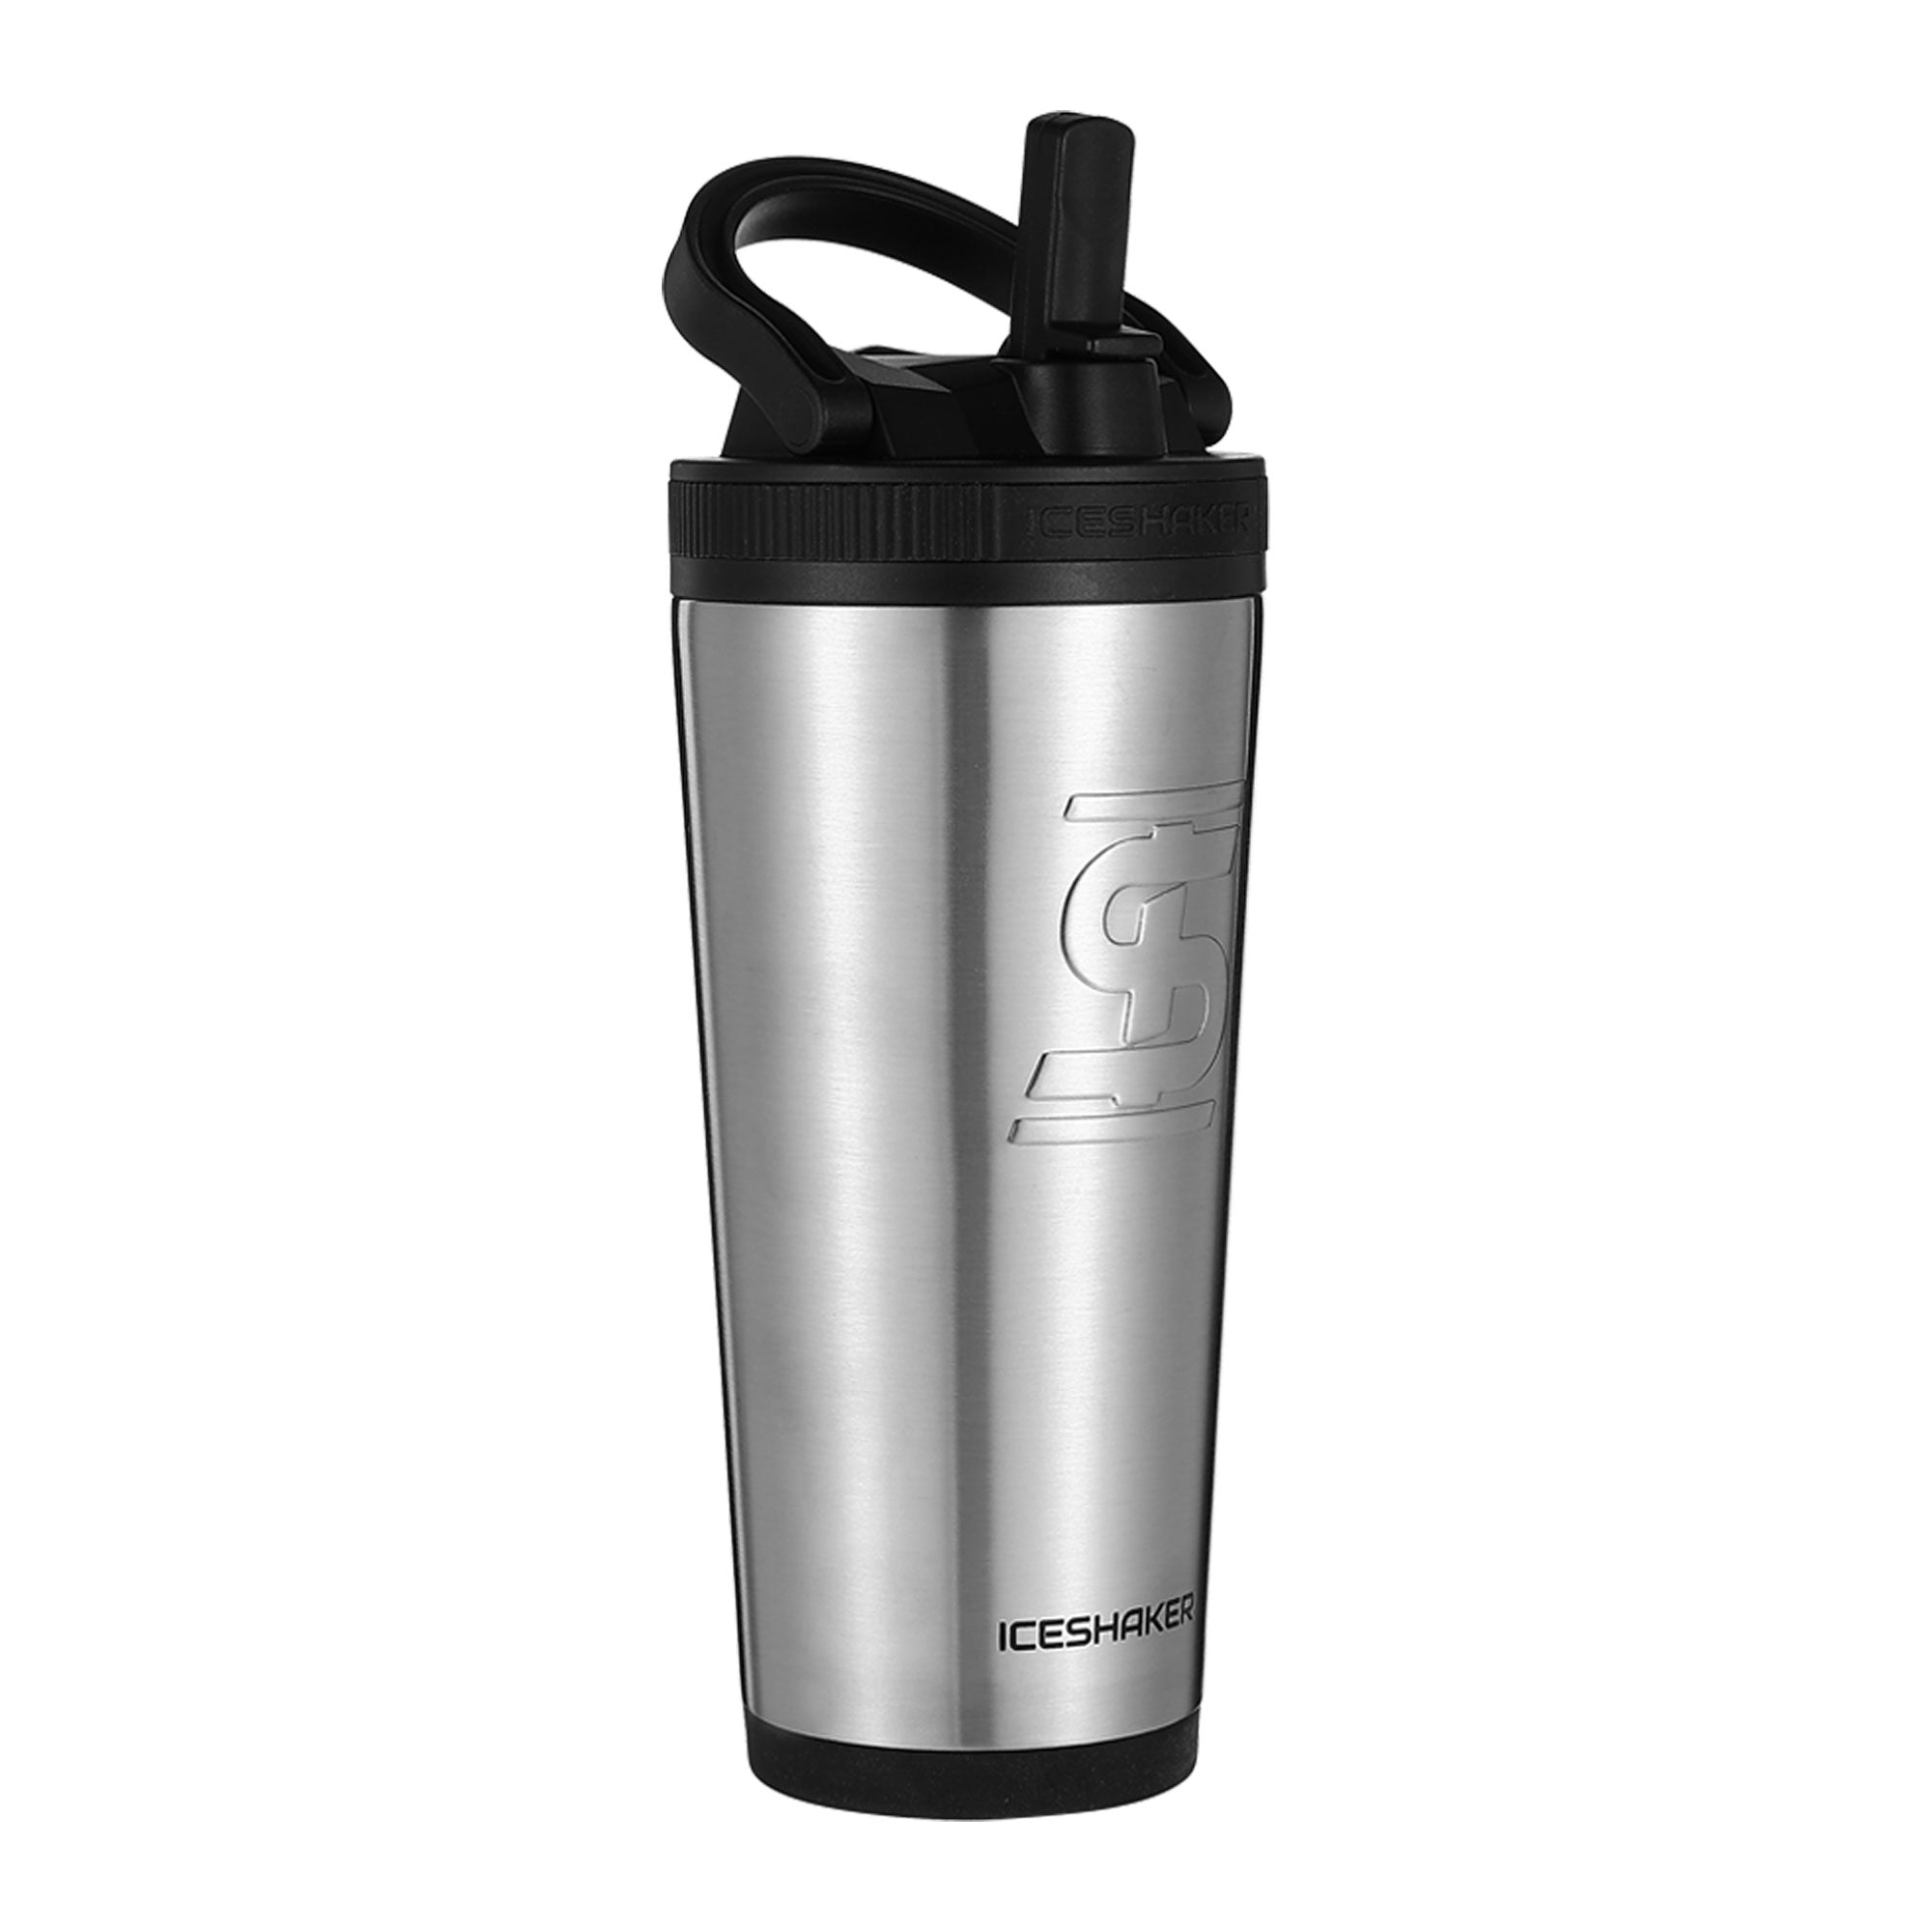  Insulated Water Bottle-Stainless Steel Vacuum Coffee Cup with  Handle,Flask Double Walled Sport Travel Mug with Leakproof Lid,Keep Hot &  Cold 12 Hours BPA Free 15oz(Black): Home & Kitchen